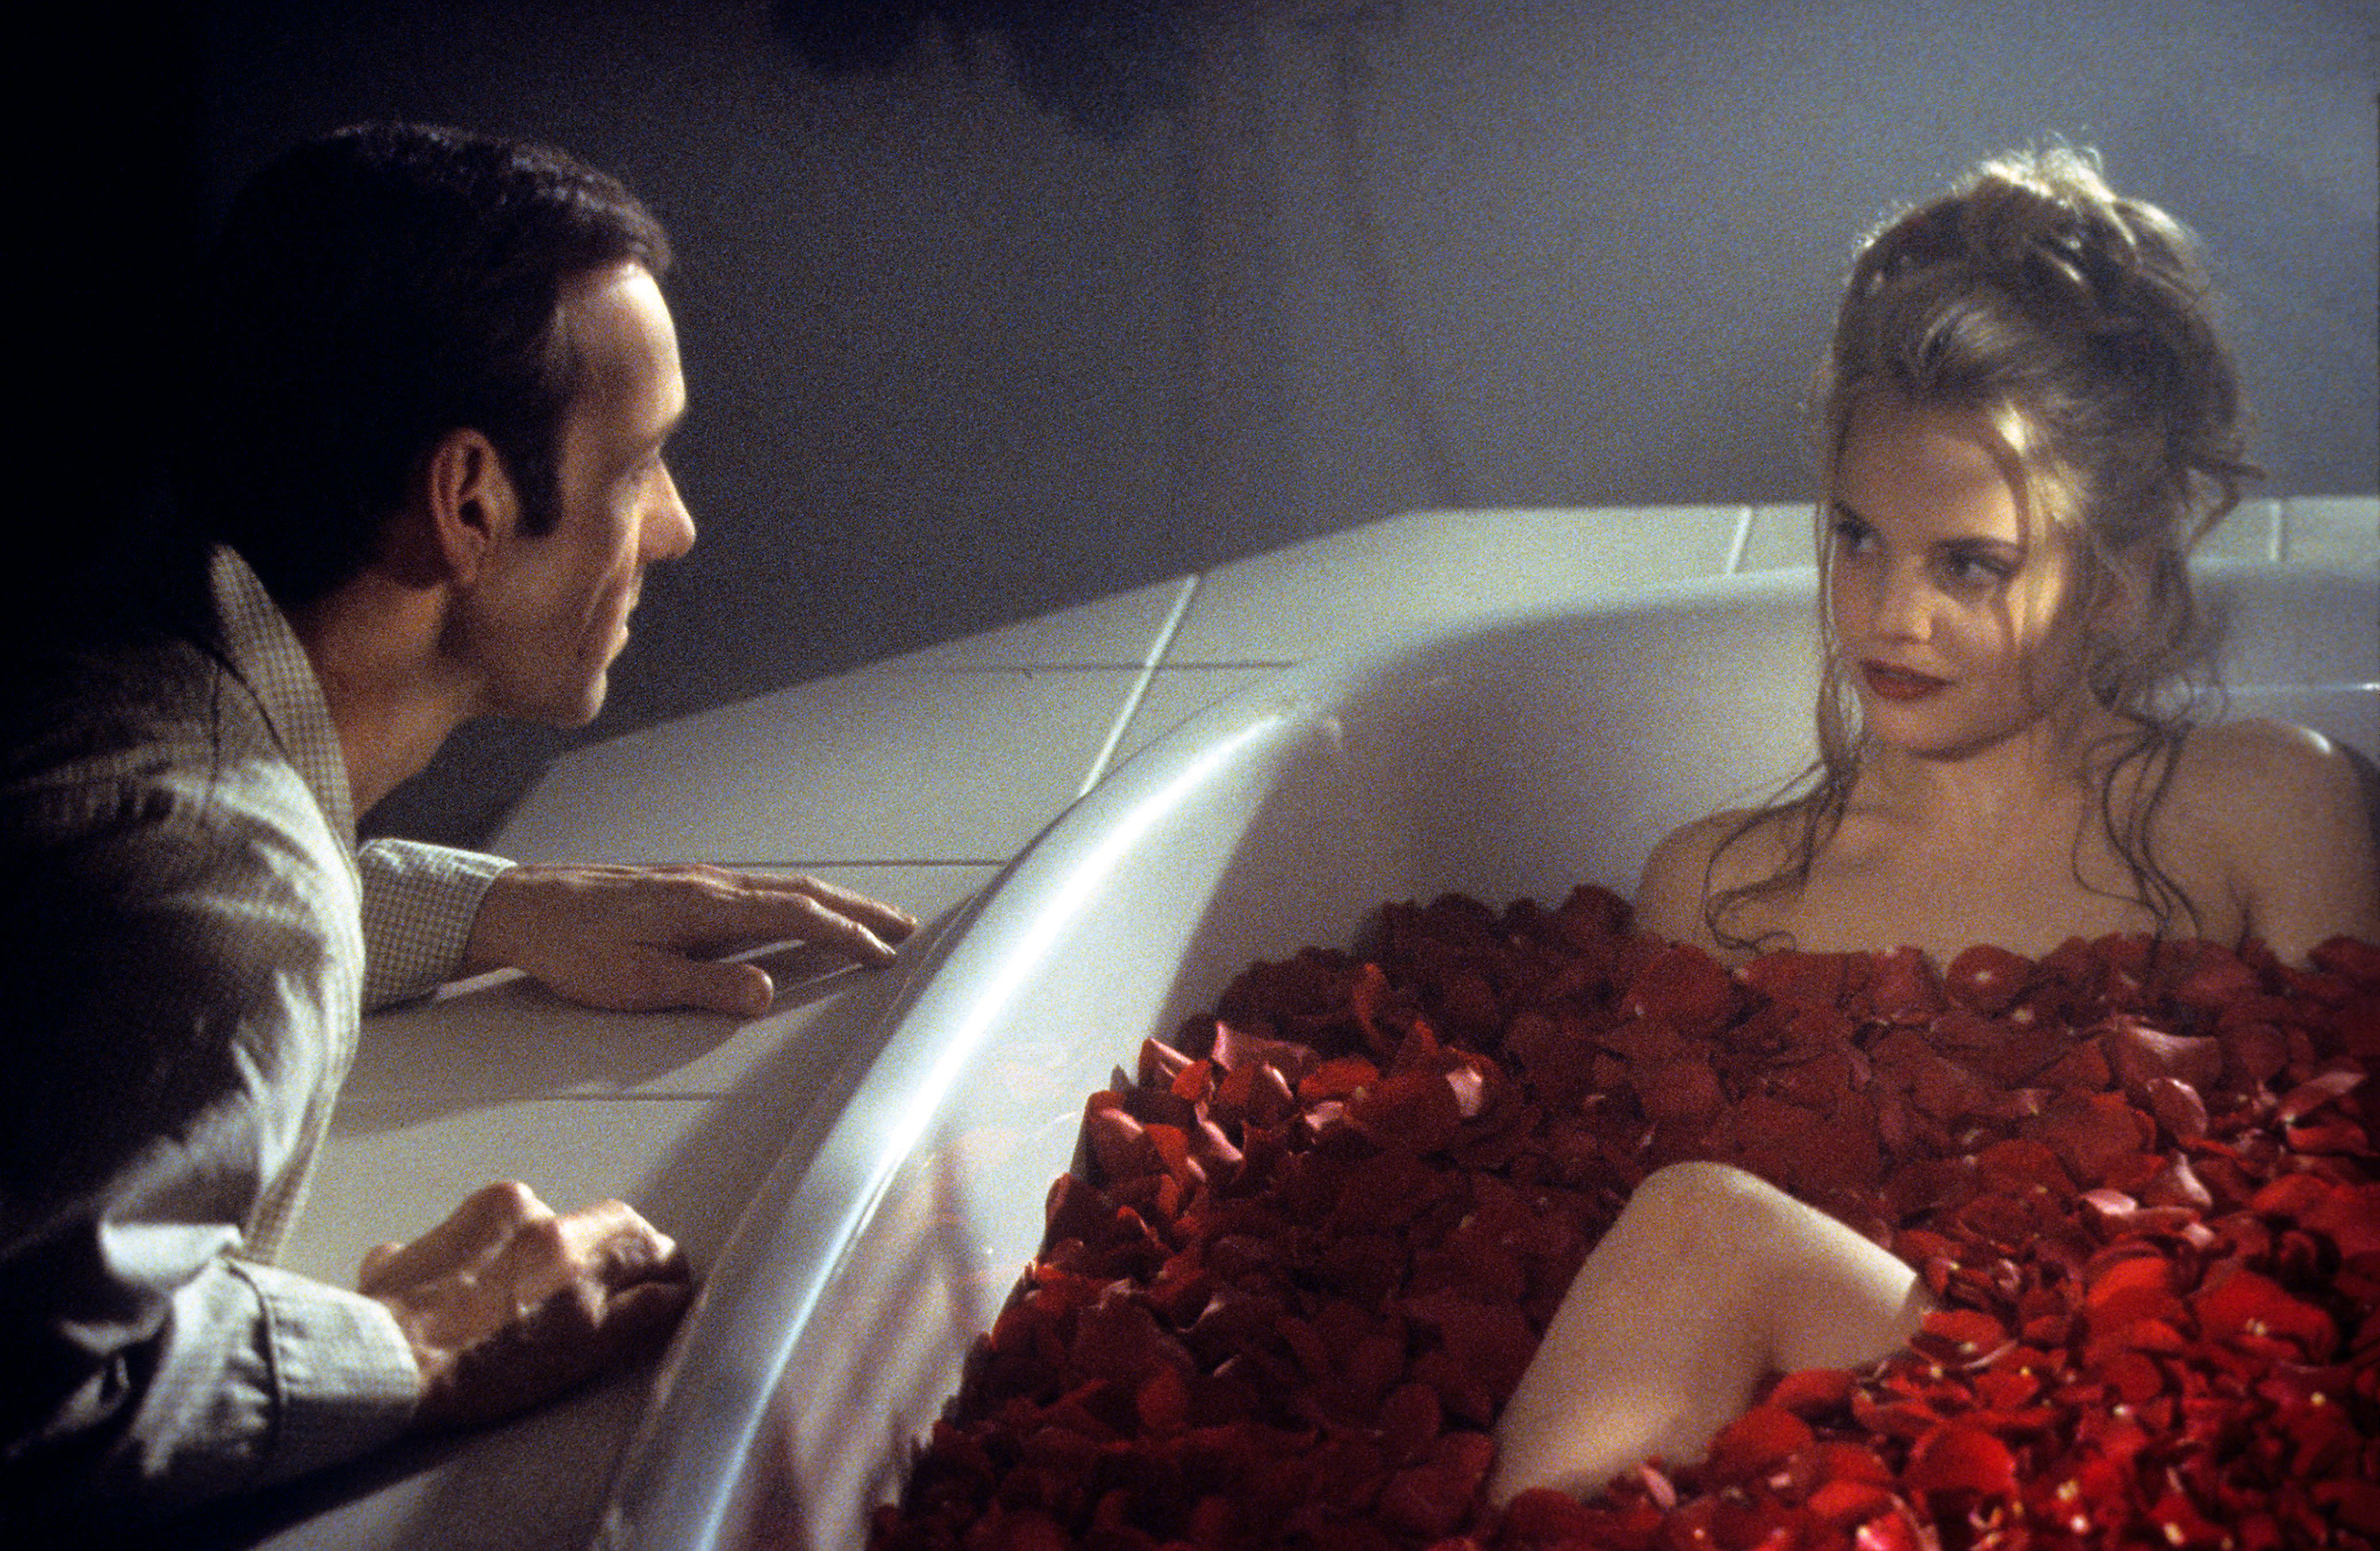 Kevin Spacey with Mena Suvari in a tub of roses in the film